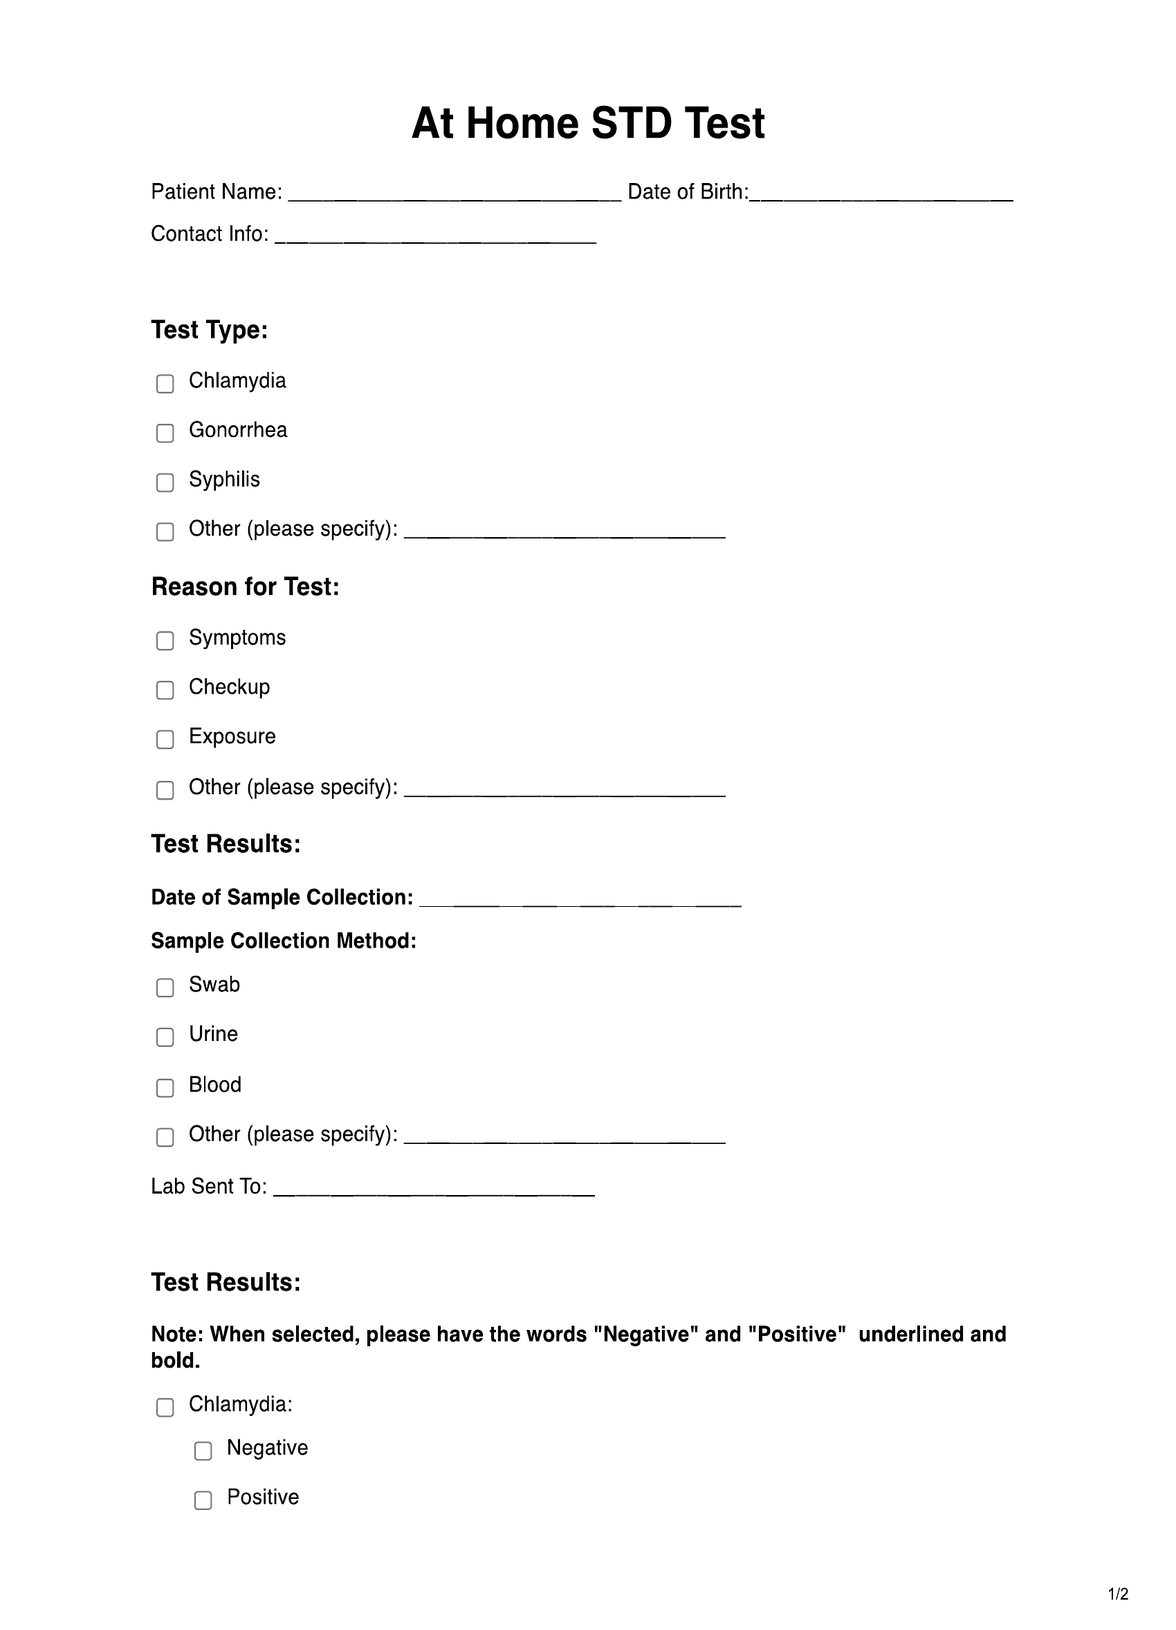 At Home STD Test PDF Example